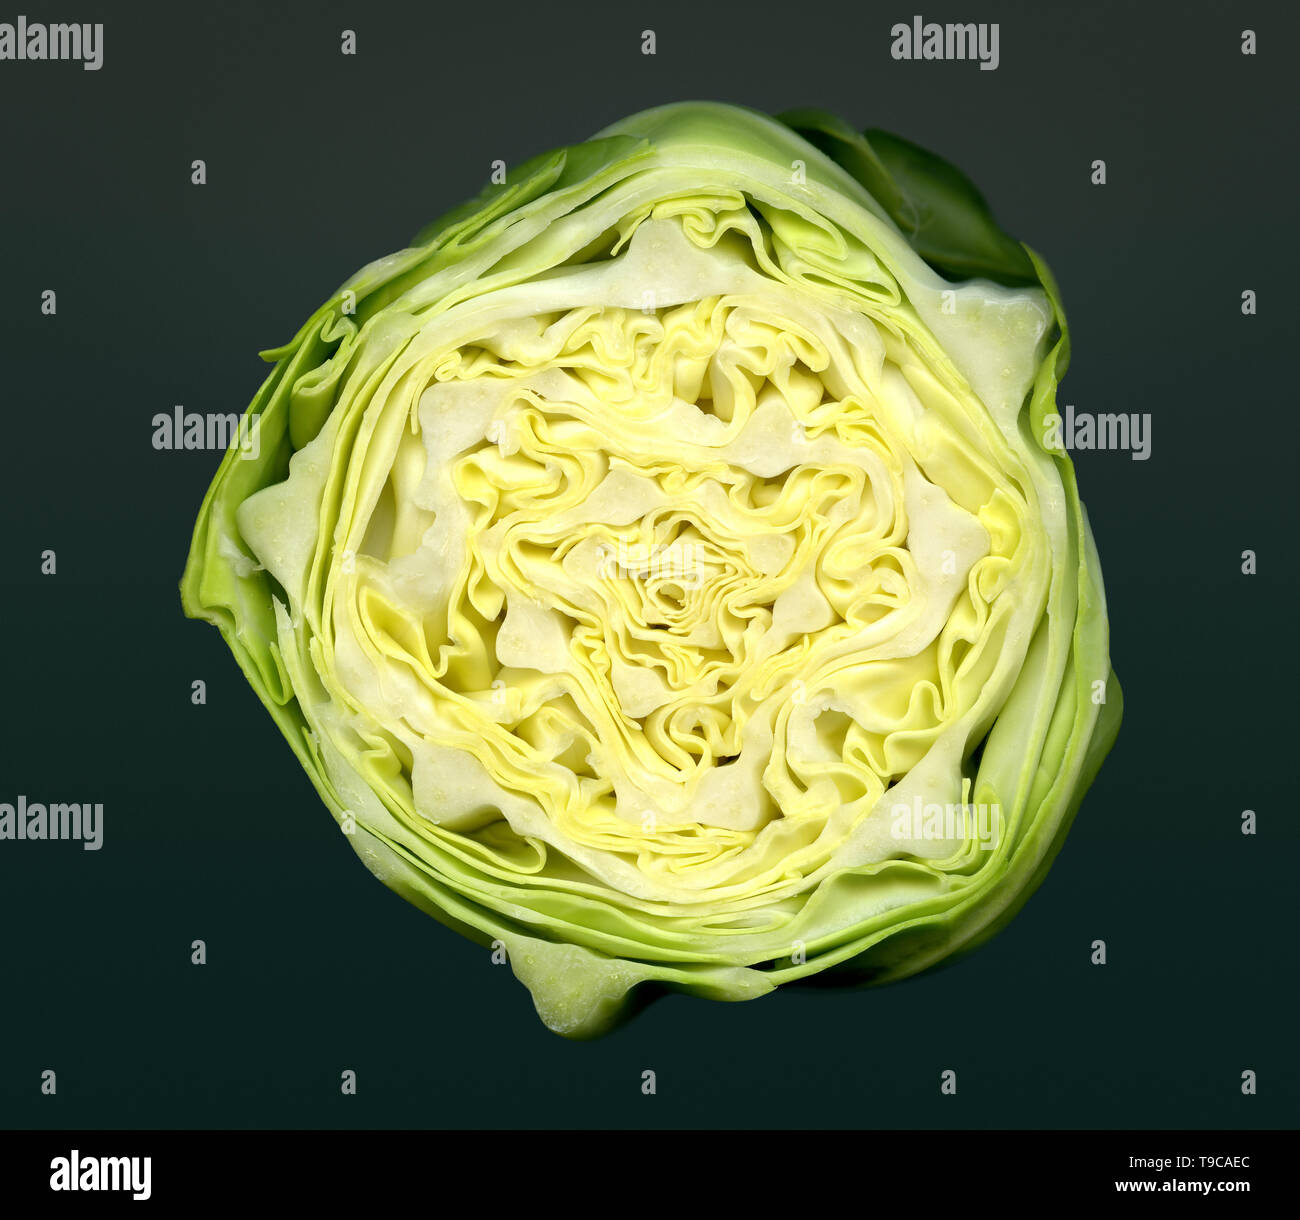 Section through a white cabbage showing structure Stock Photo